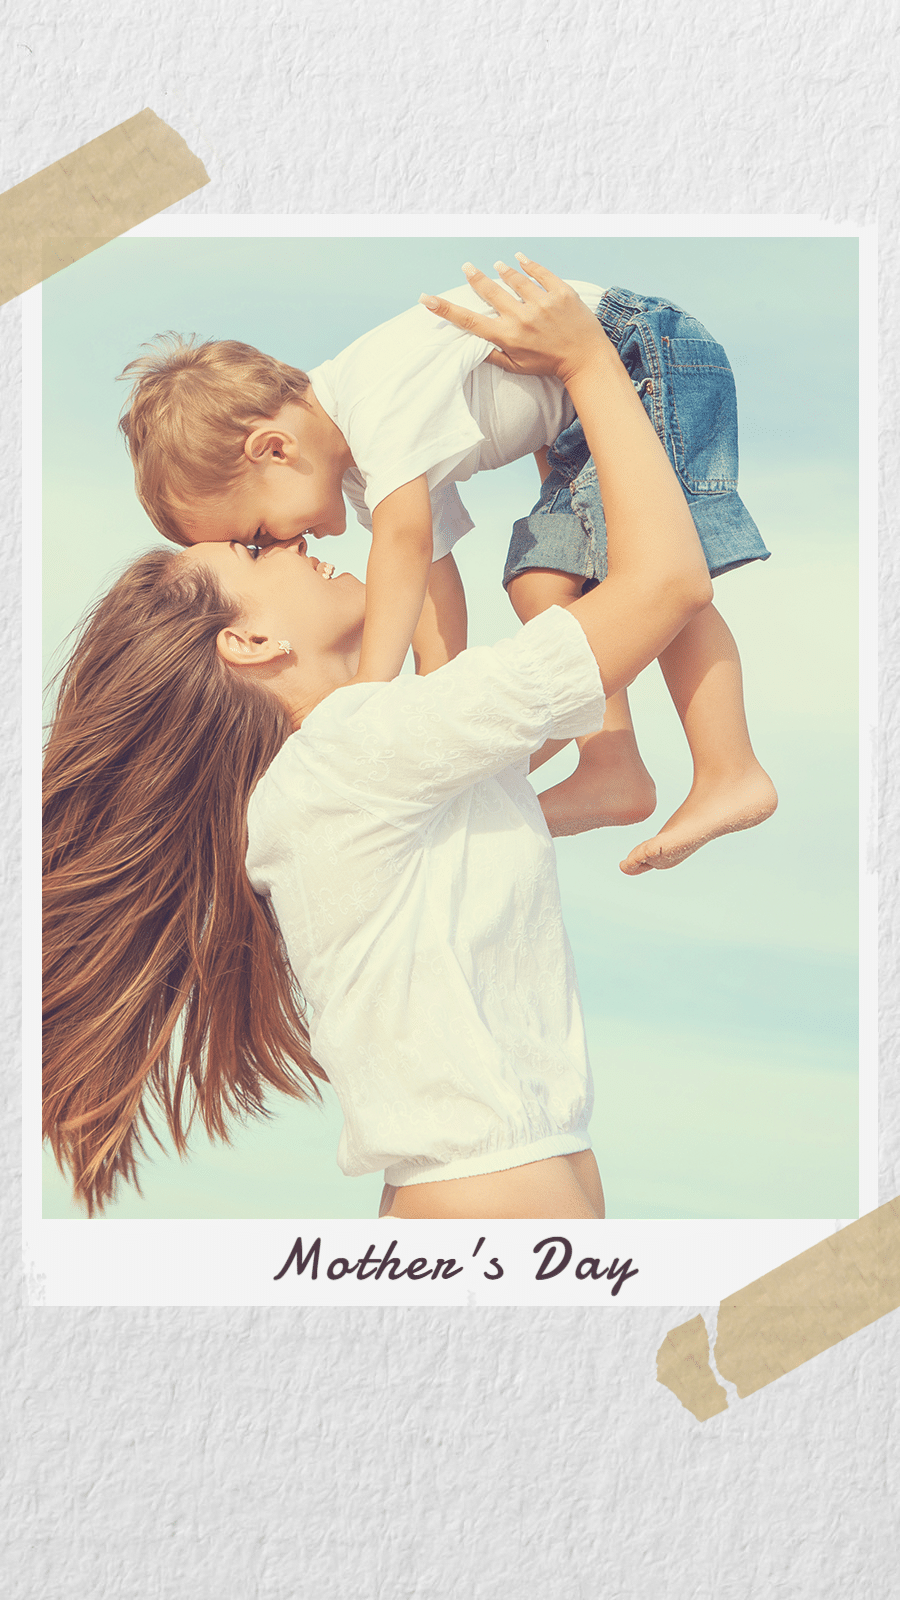 Mother’s Day Mother Baby Photo Simple Fashion Style Polaroid Simulation Instagram Story预览效果